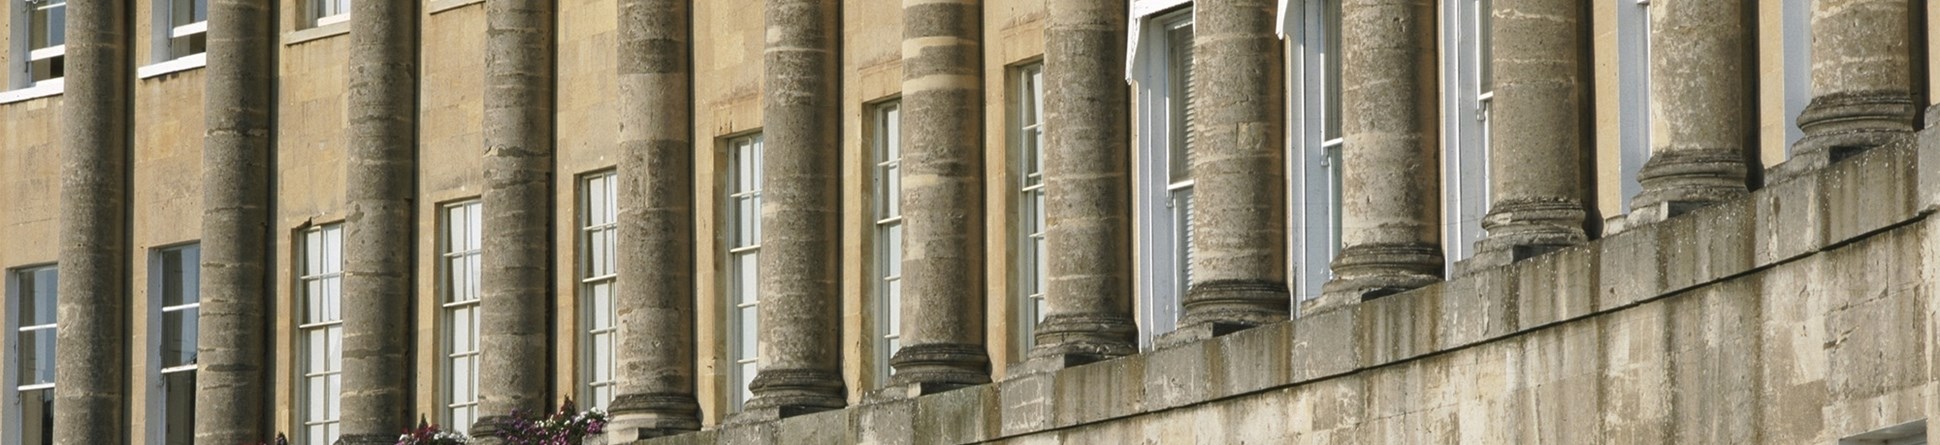 The Royal Crescent in Bath.  Exterior of Nos 4 – 8.